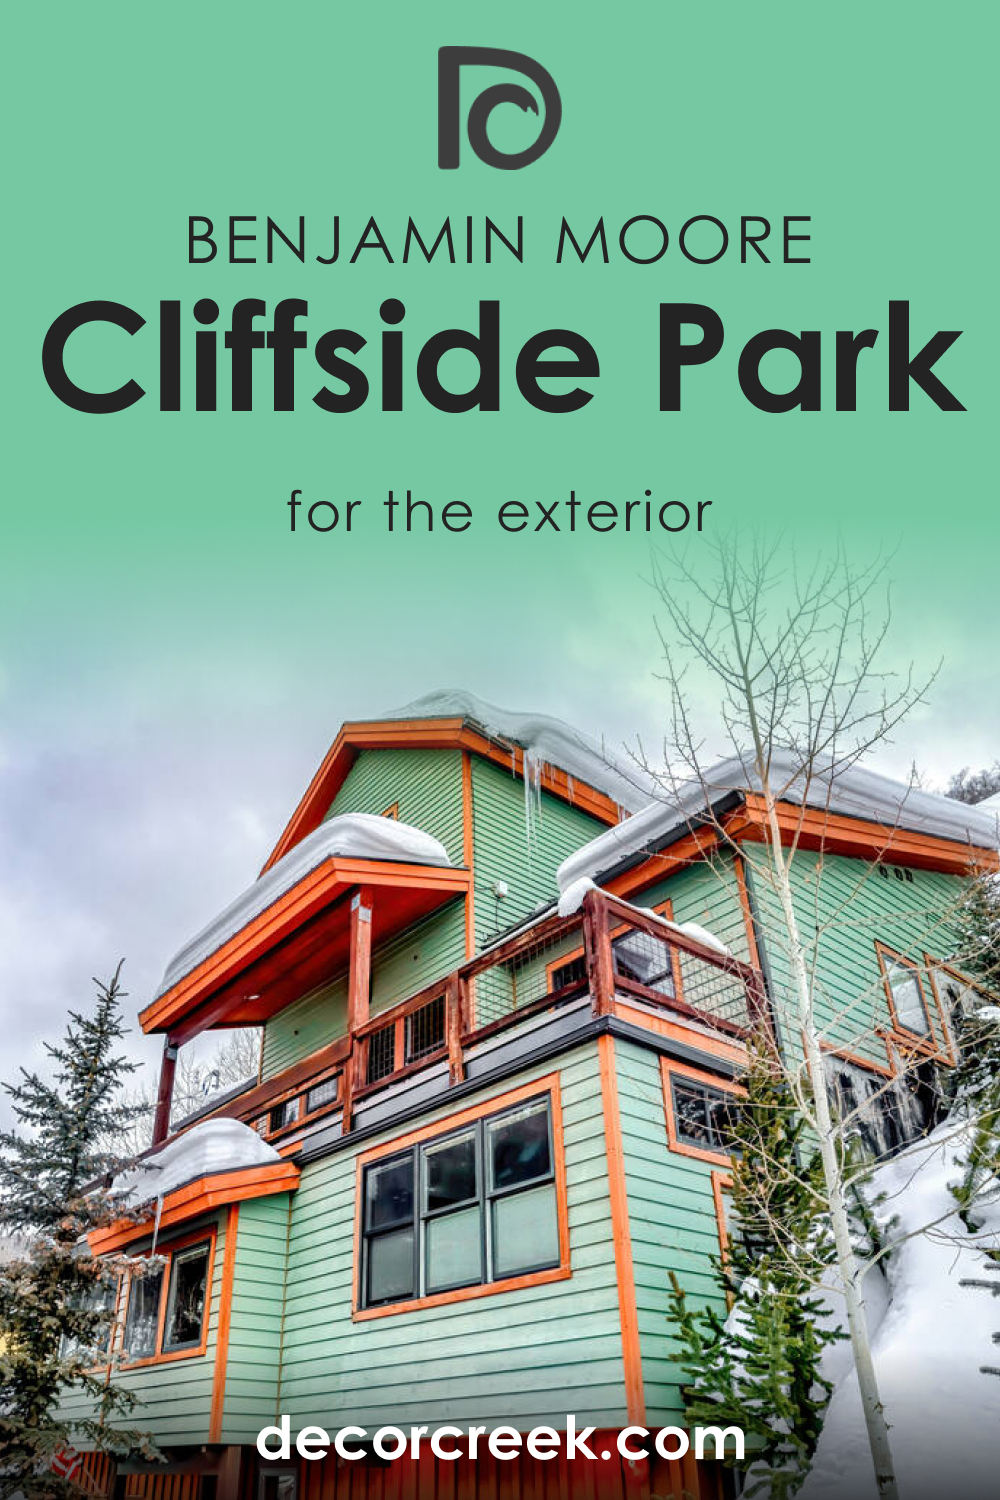 How to Use Cliffside Park 579 for an Exterior?